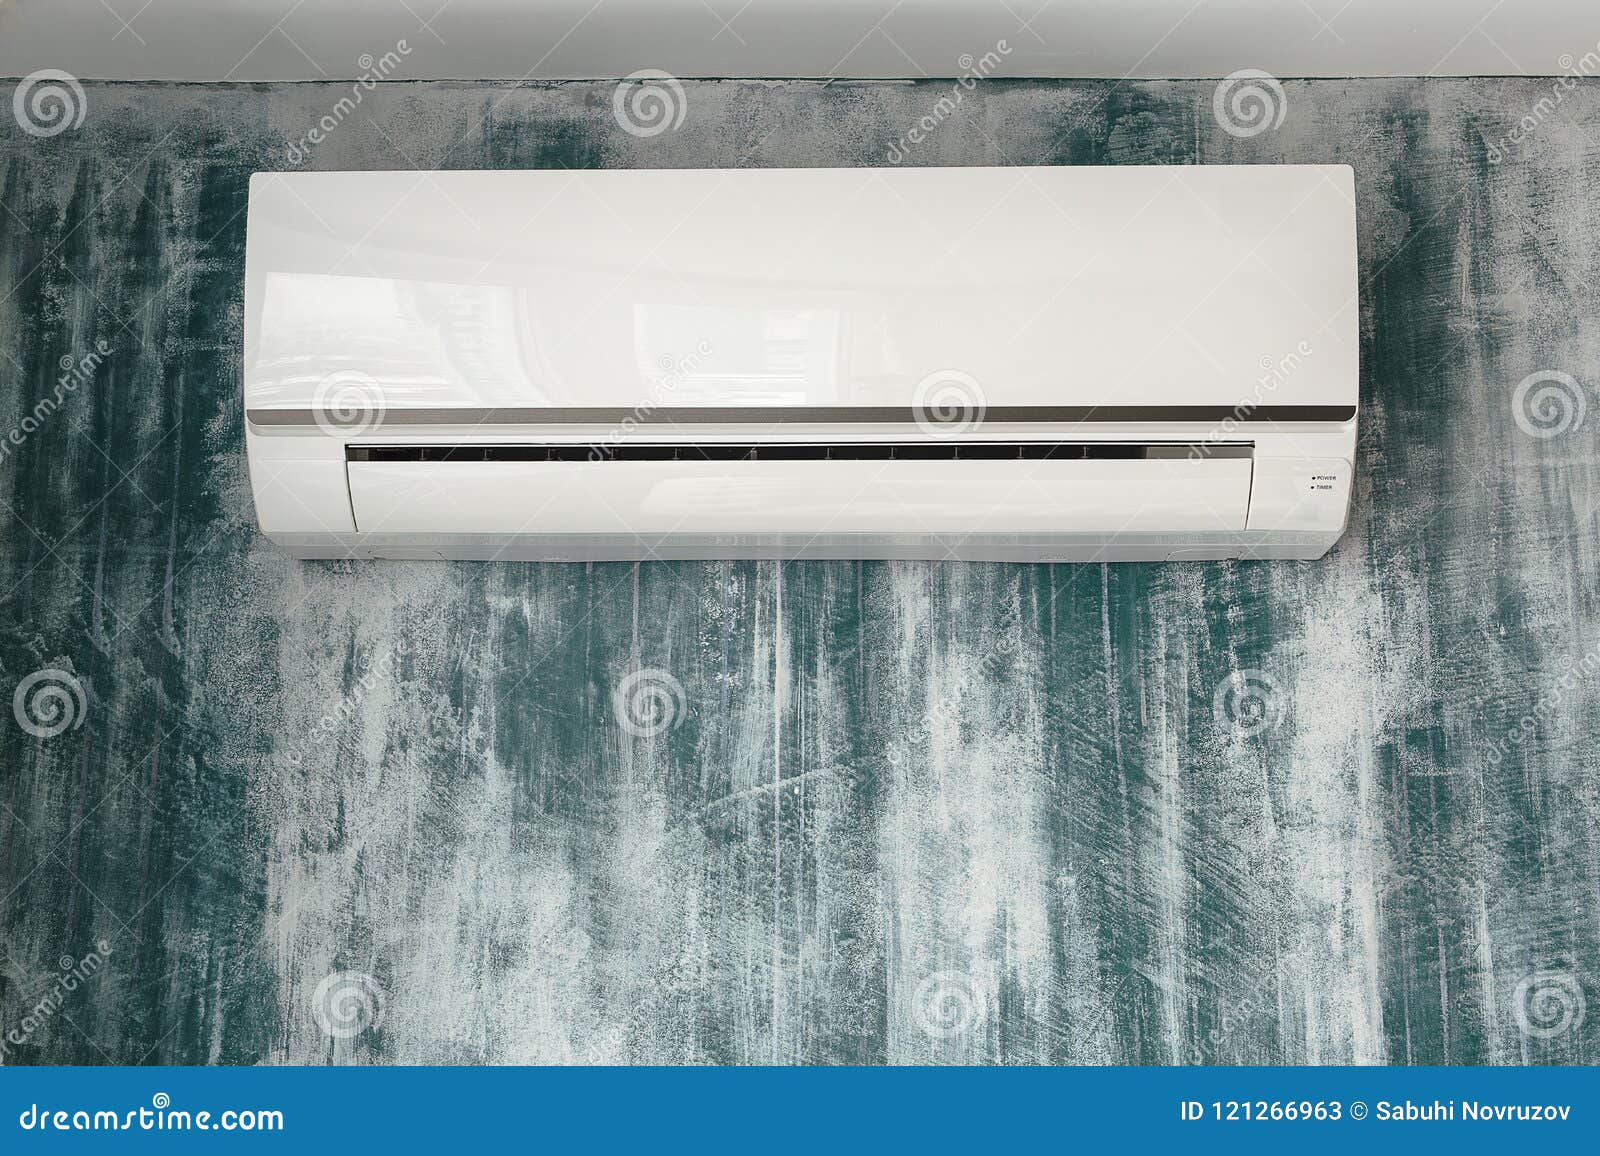 Air Conditioner Wallpaper Vector Images (over 250)